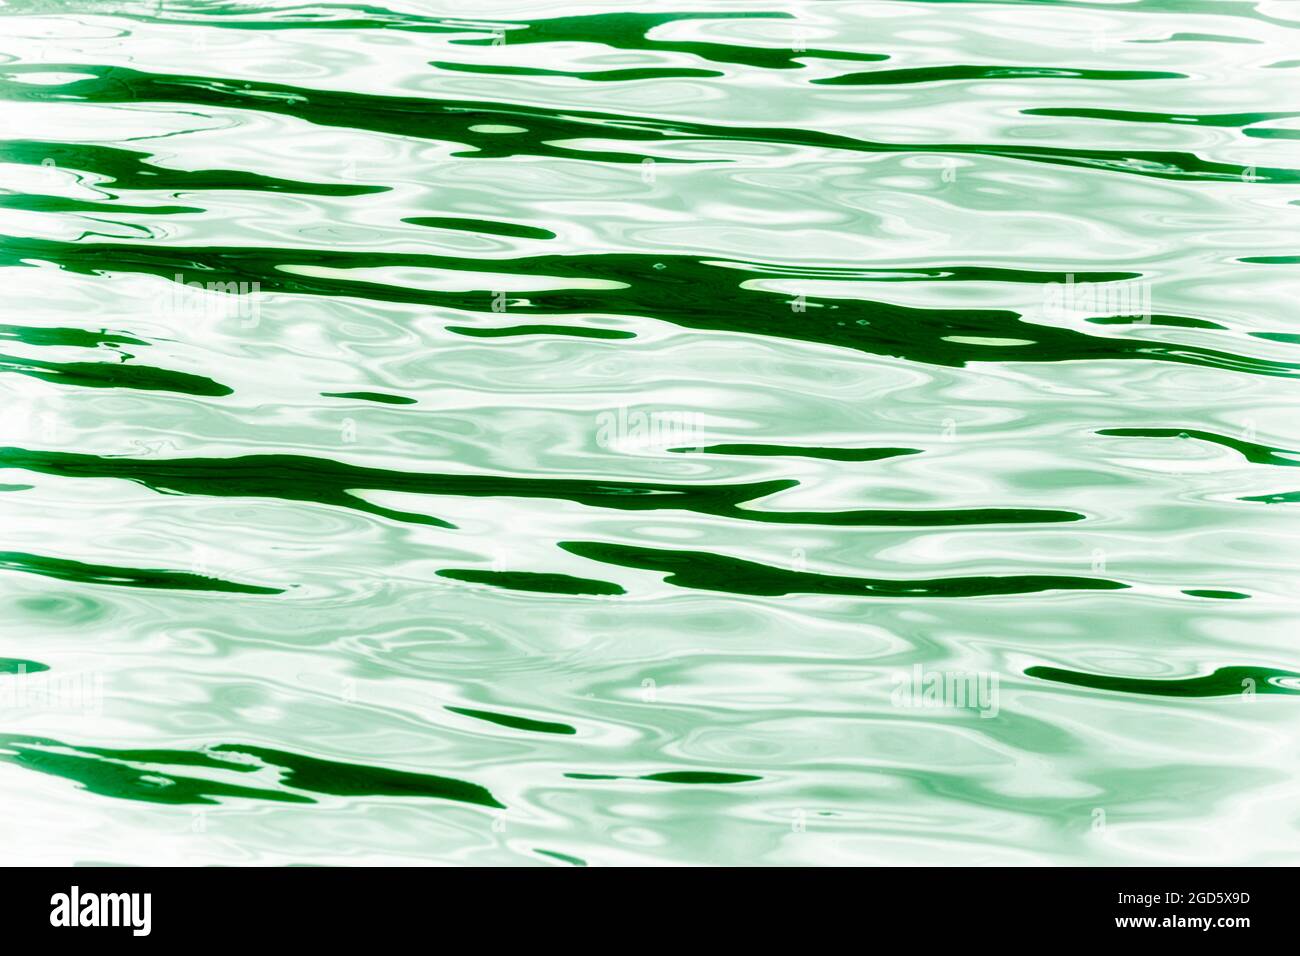 Swirls and motions is evident in this enhanced image close up of lake water. Stock Photo